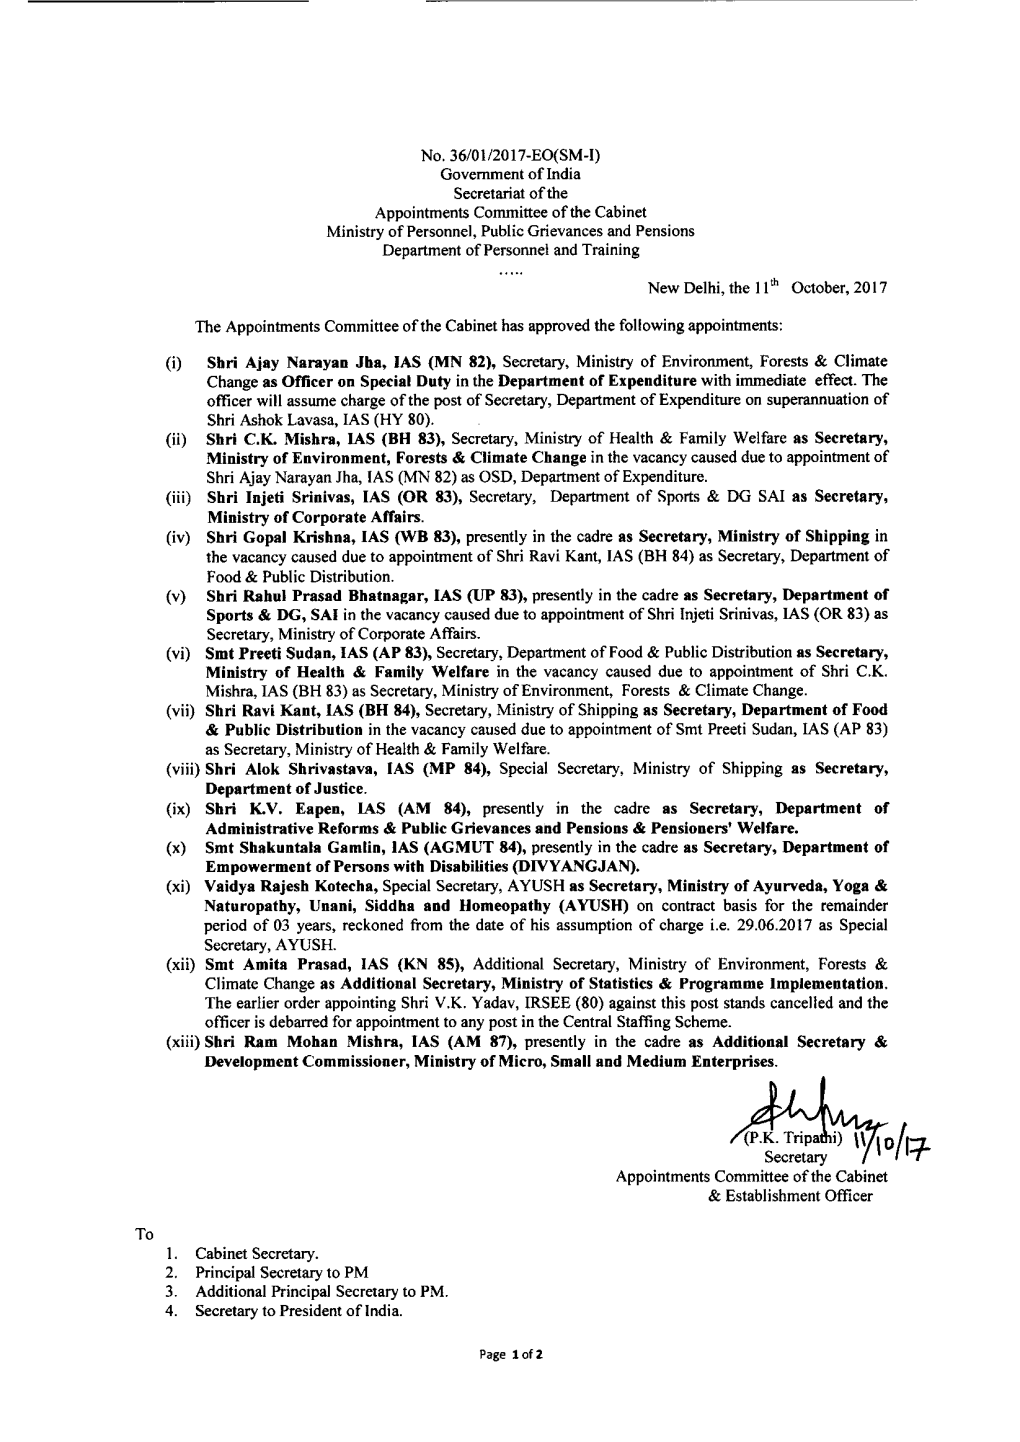 Government of India Secretariat of the Appointments Committee of the Cabinet Ministry of Personnel, Public Grievances and Pensio